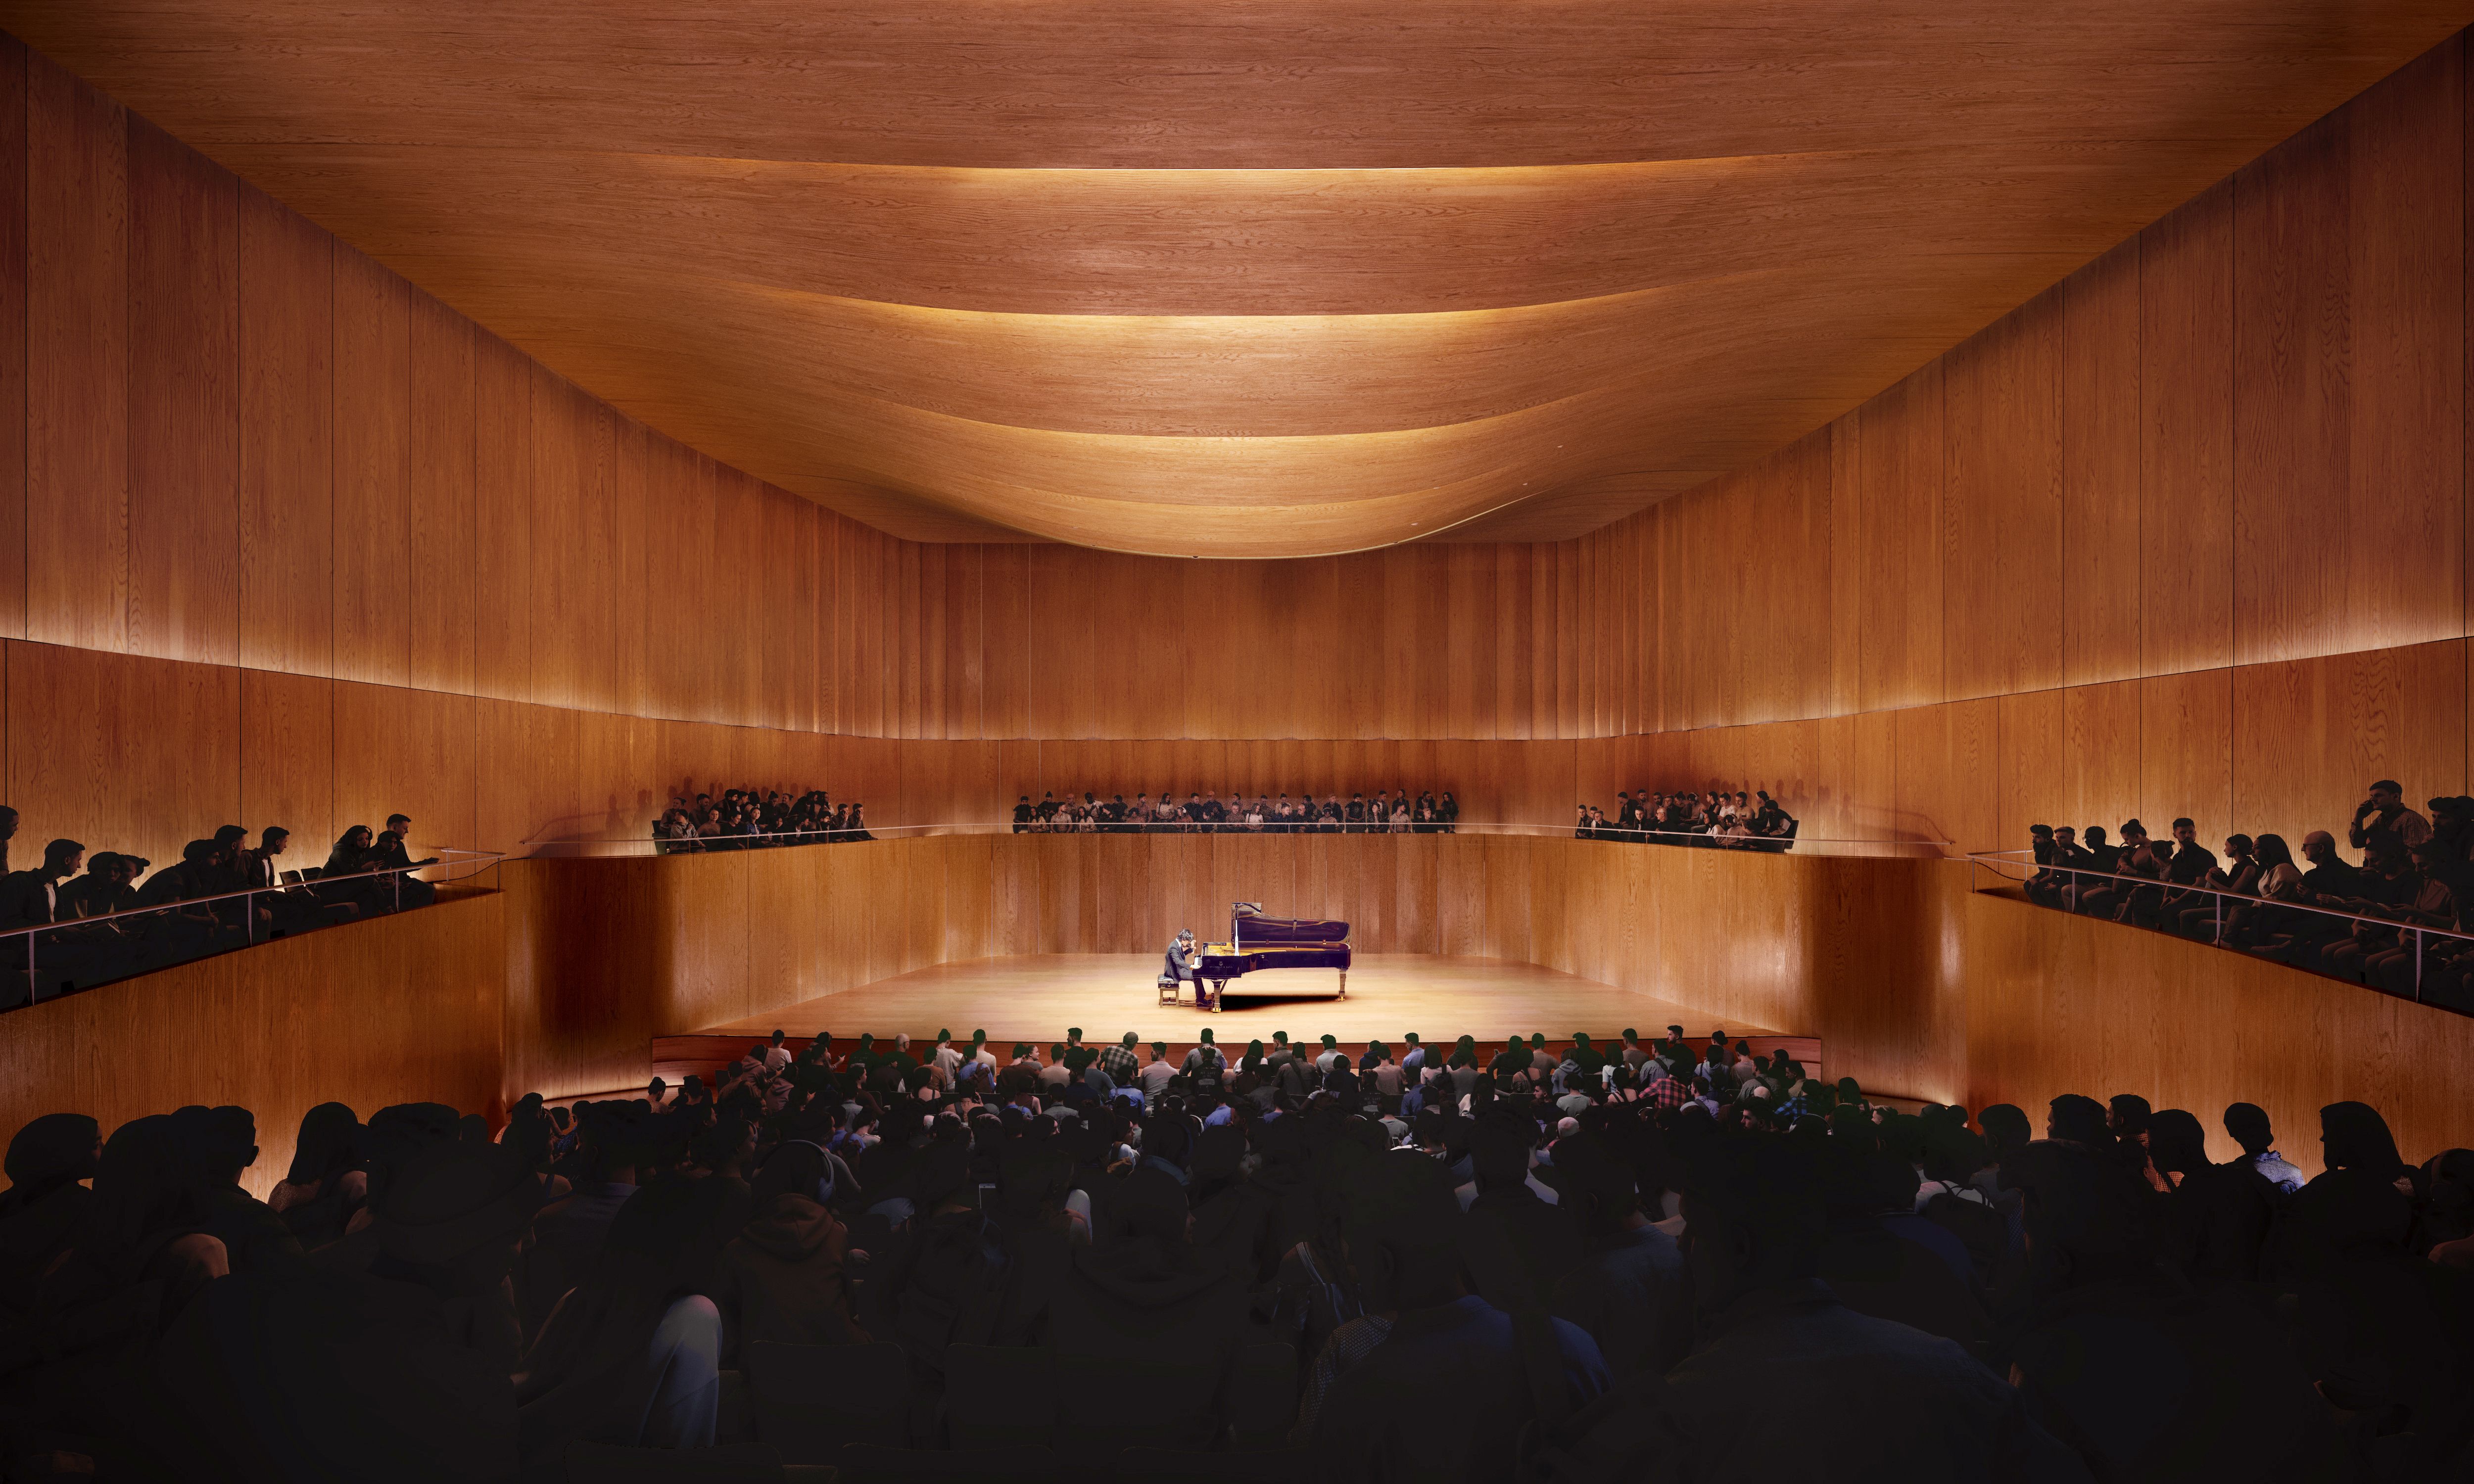 Concert hall of the Carl Bechstein Campus